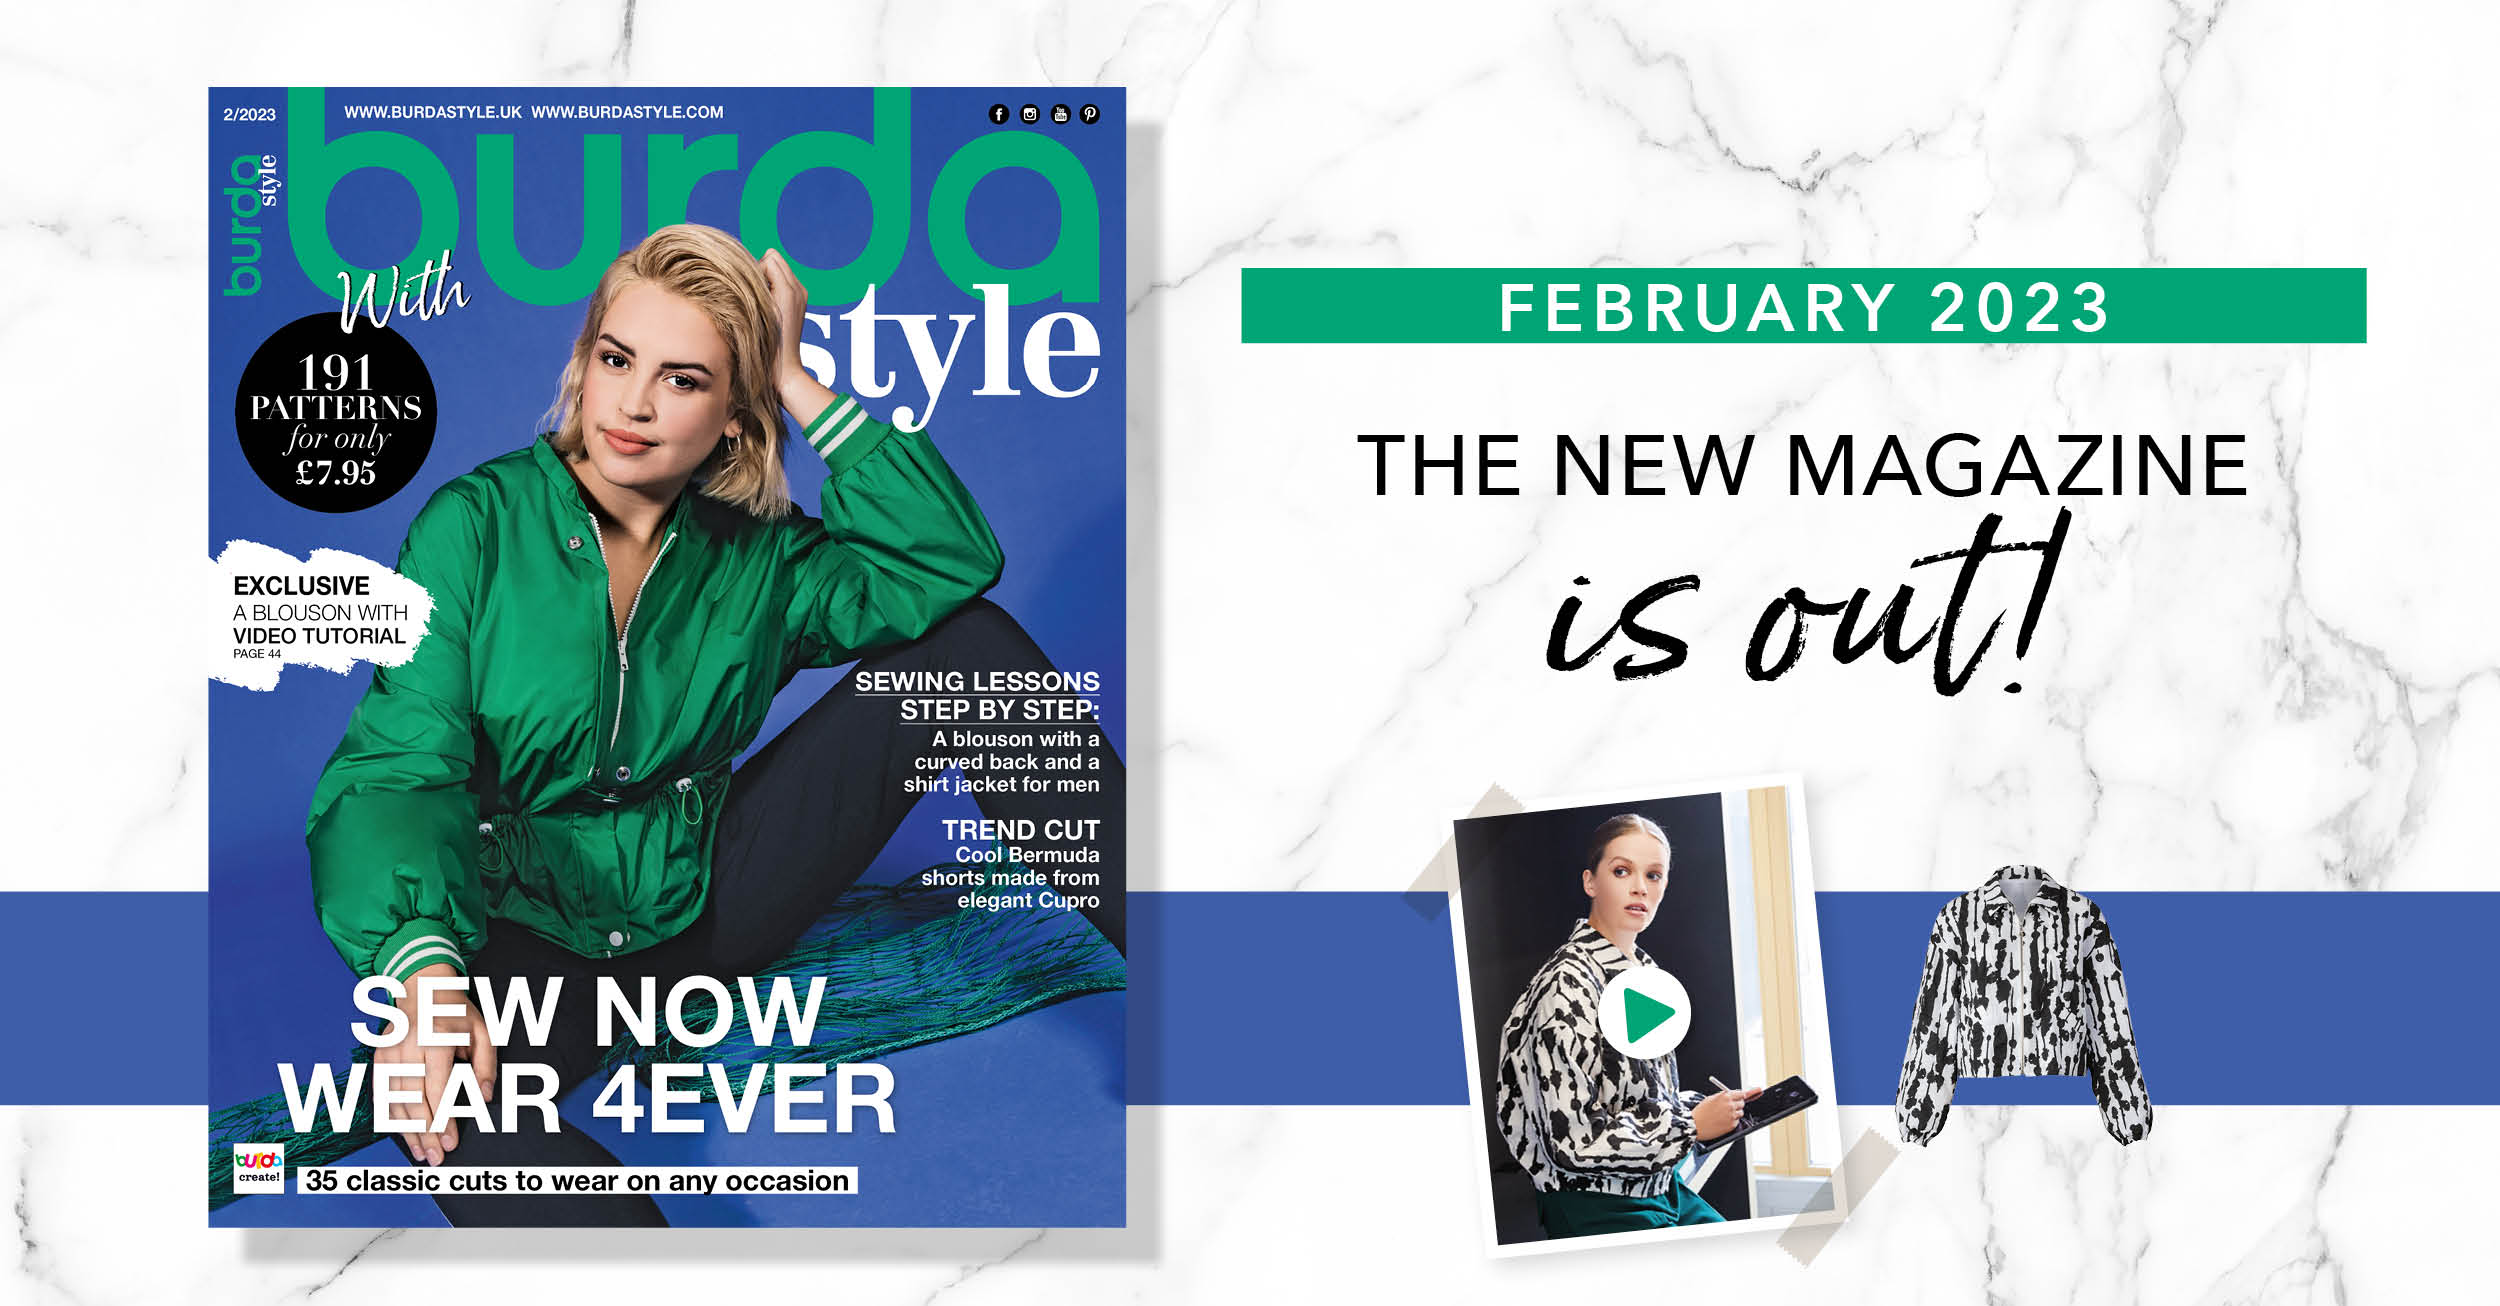 February 2023: The New Issue of Burda Style!